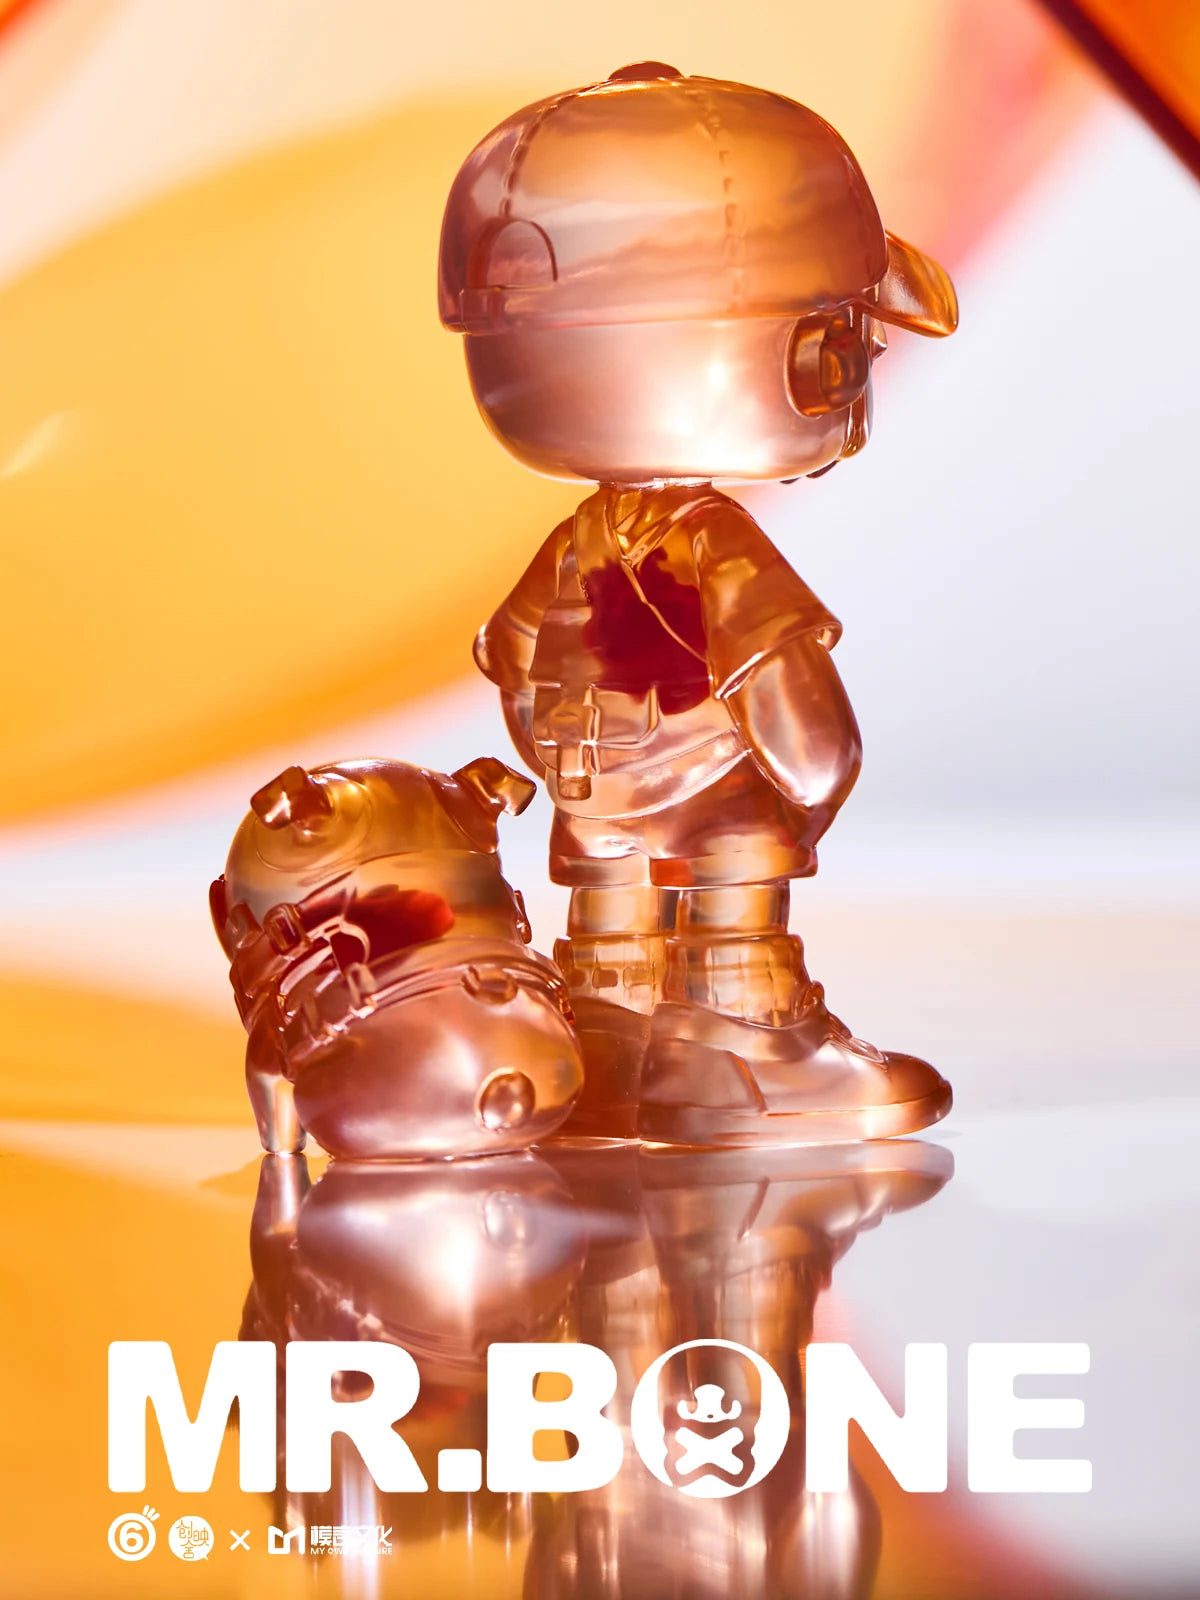 A limited 12cm resin figurine, MR.BONE Grylls - Heart Beat, featuring a boy and a girl cartoon toy. From Strangecat Toys, a blind box and art toy store.